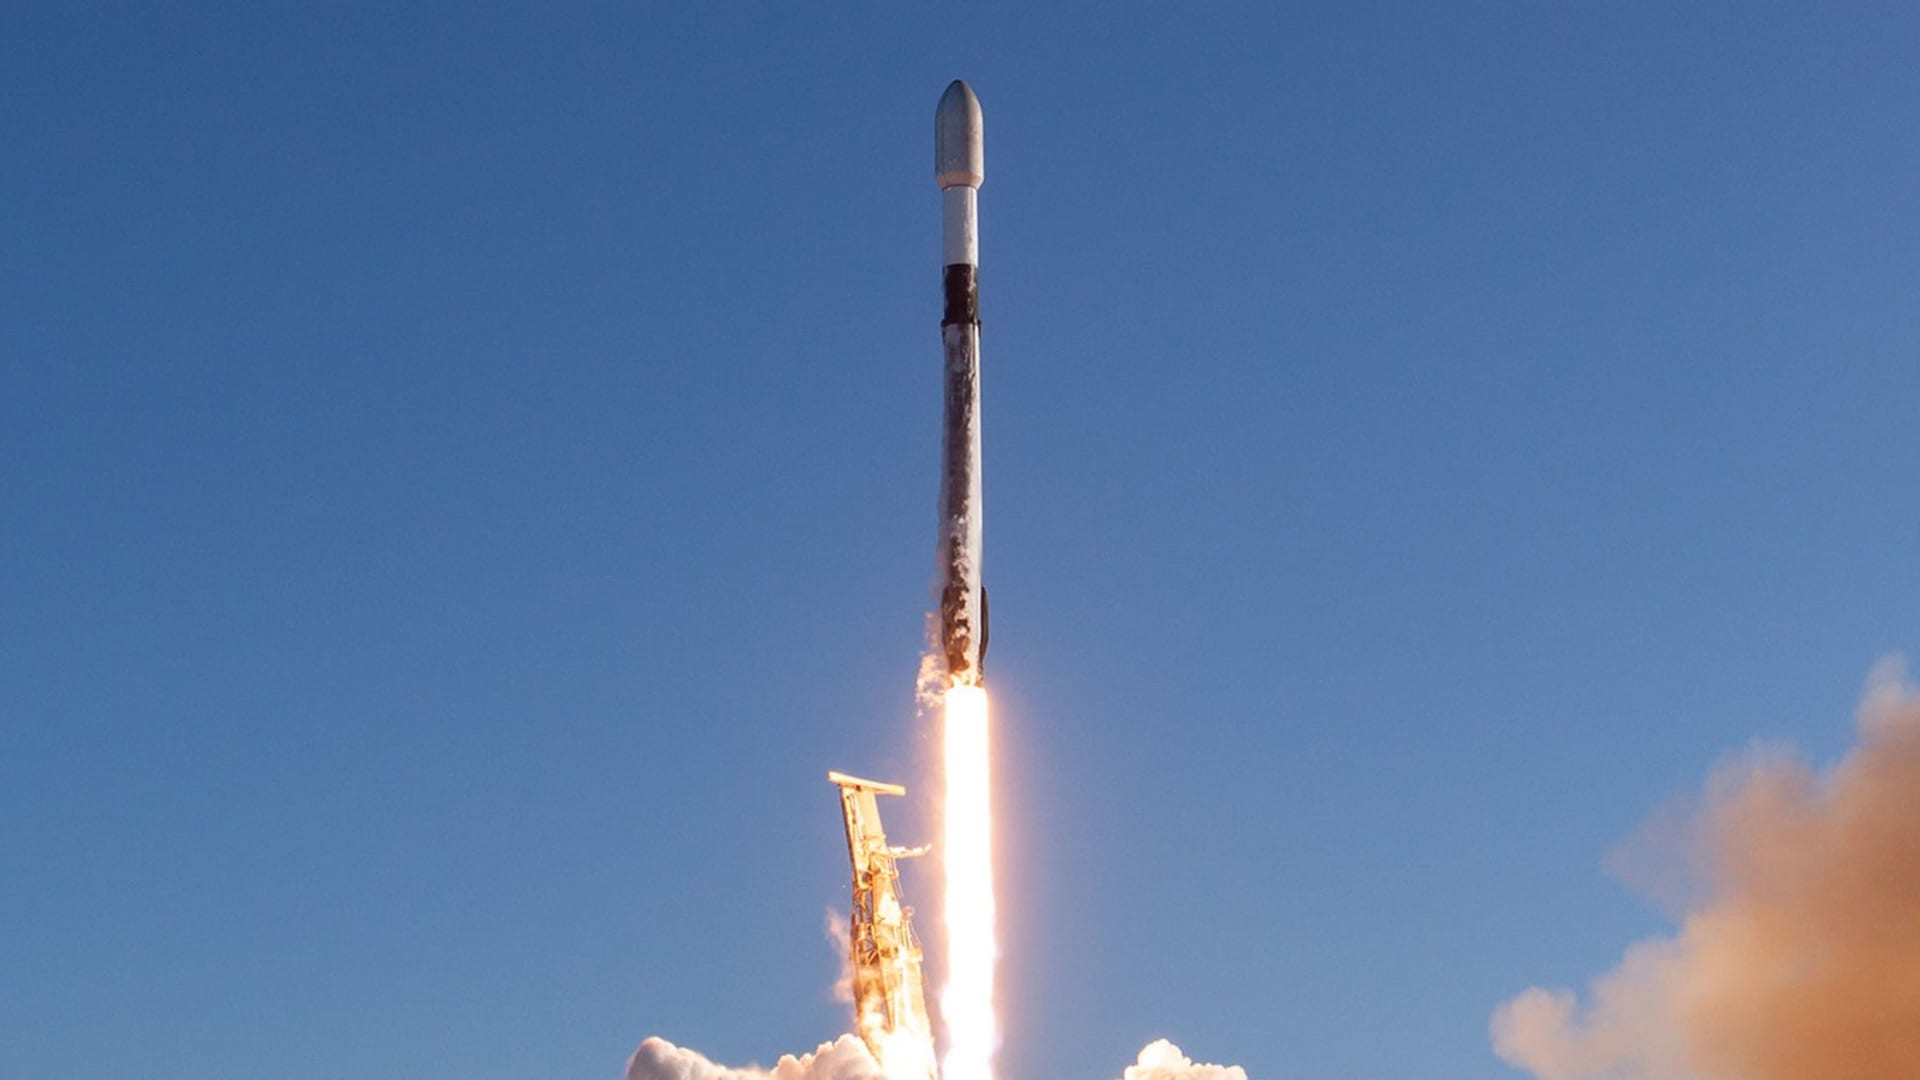 buys SpaceX rocket launches for Kuiper satellite internet project